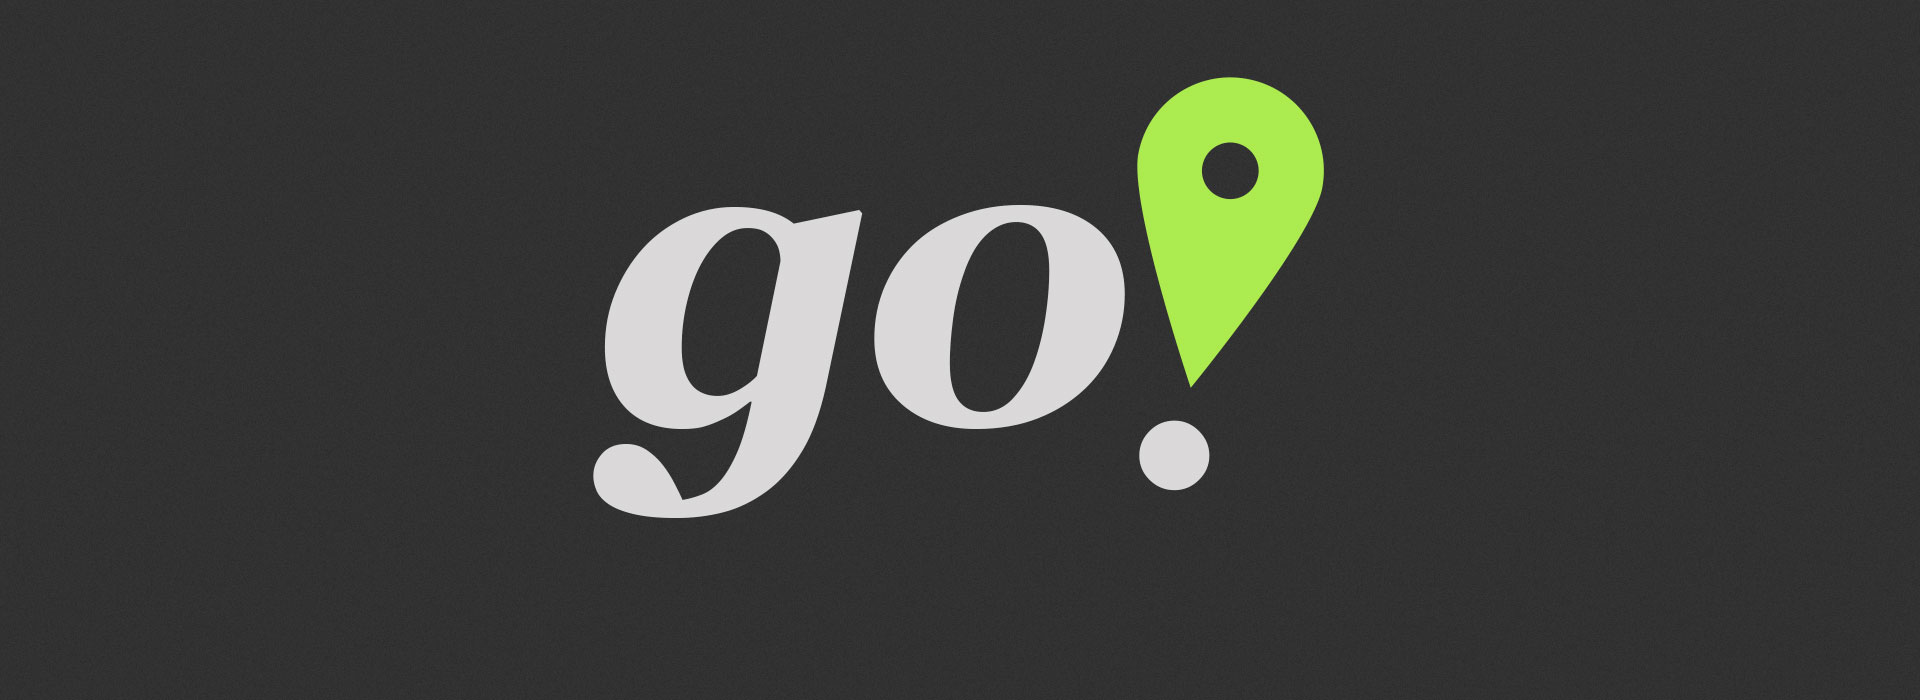 The logo for go! on a dark background